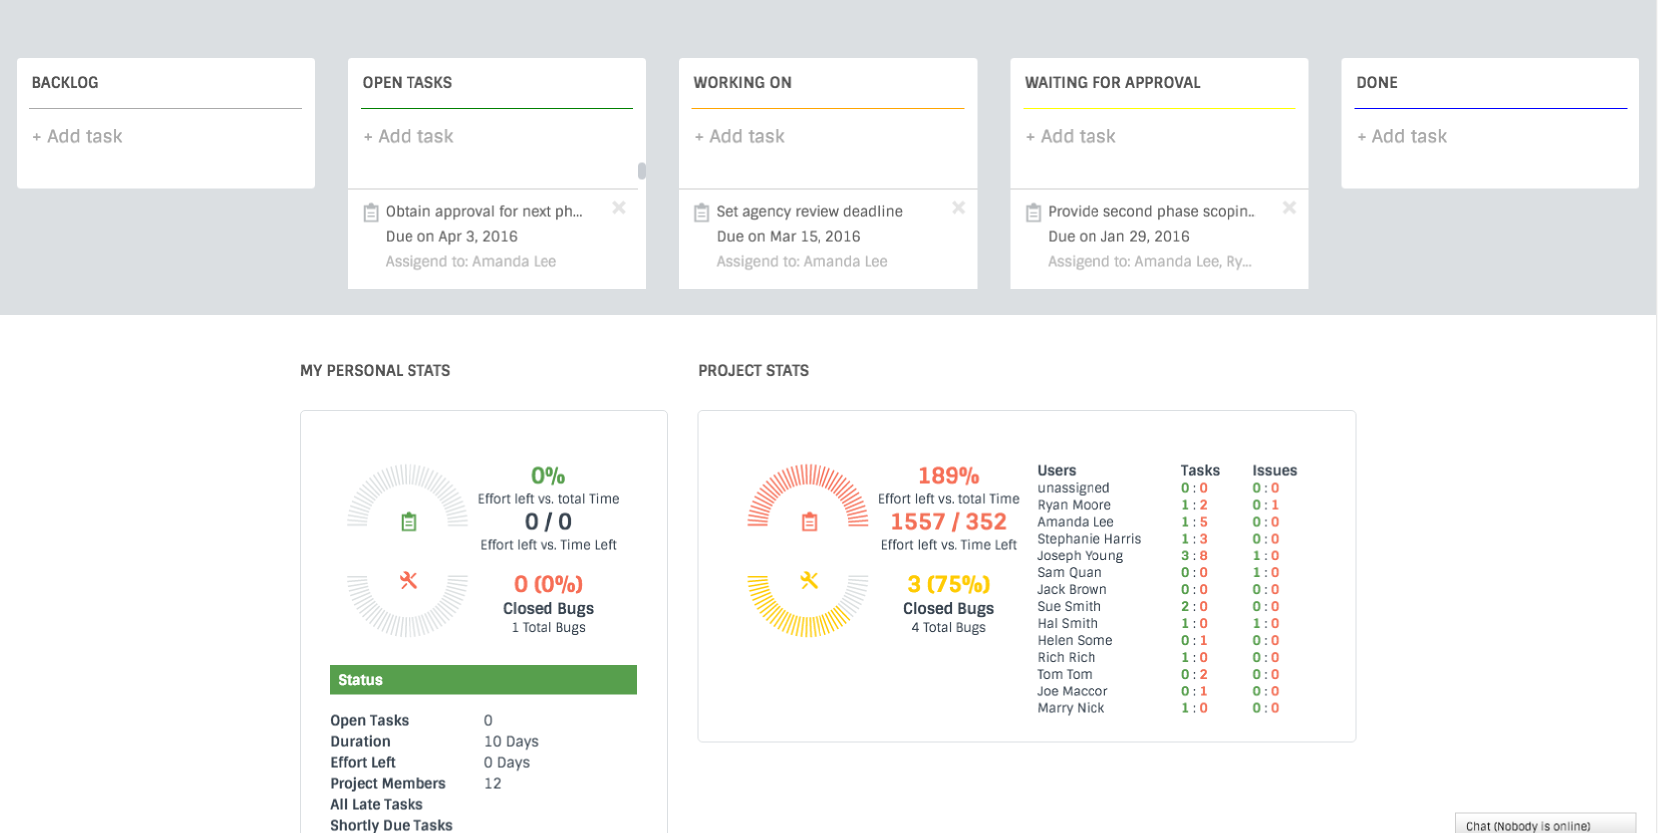 Bug and Issue Tracking Dashboard